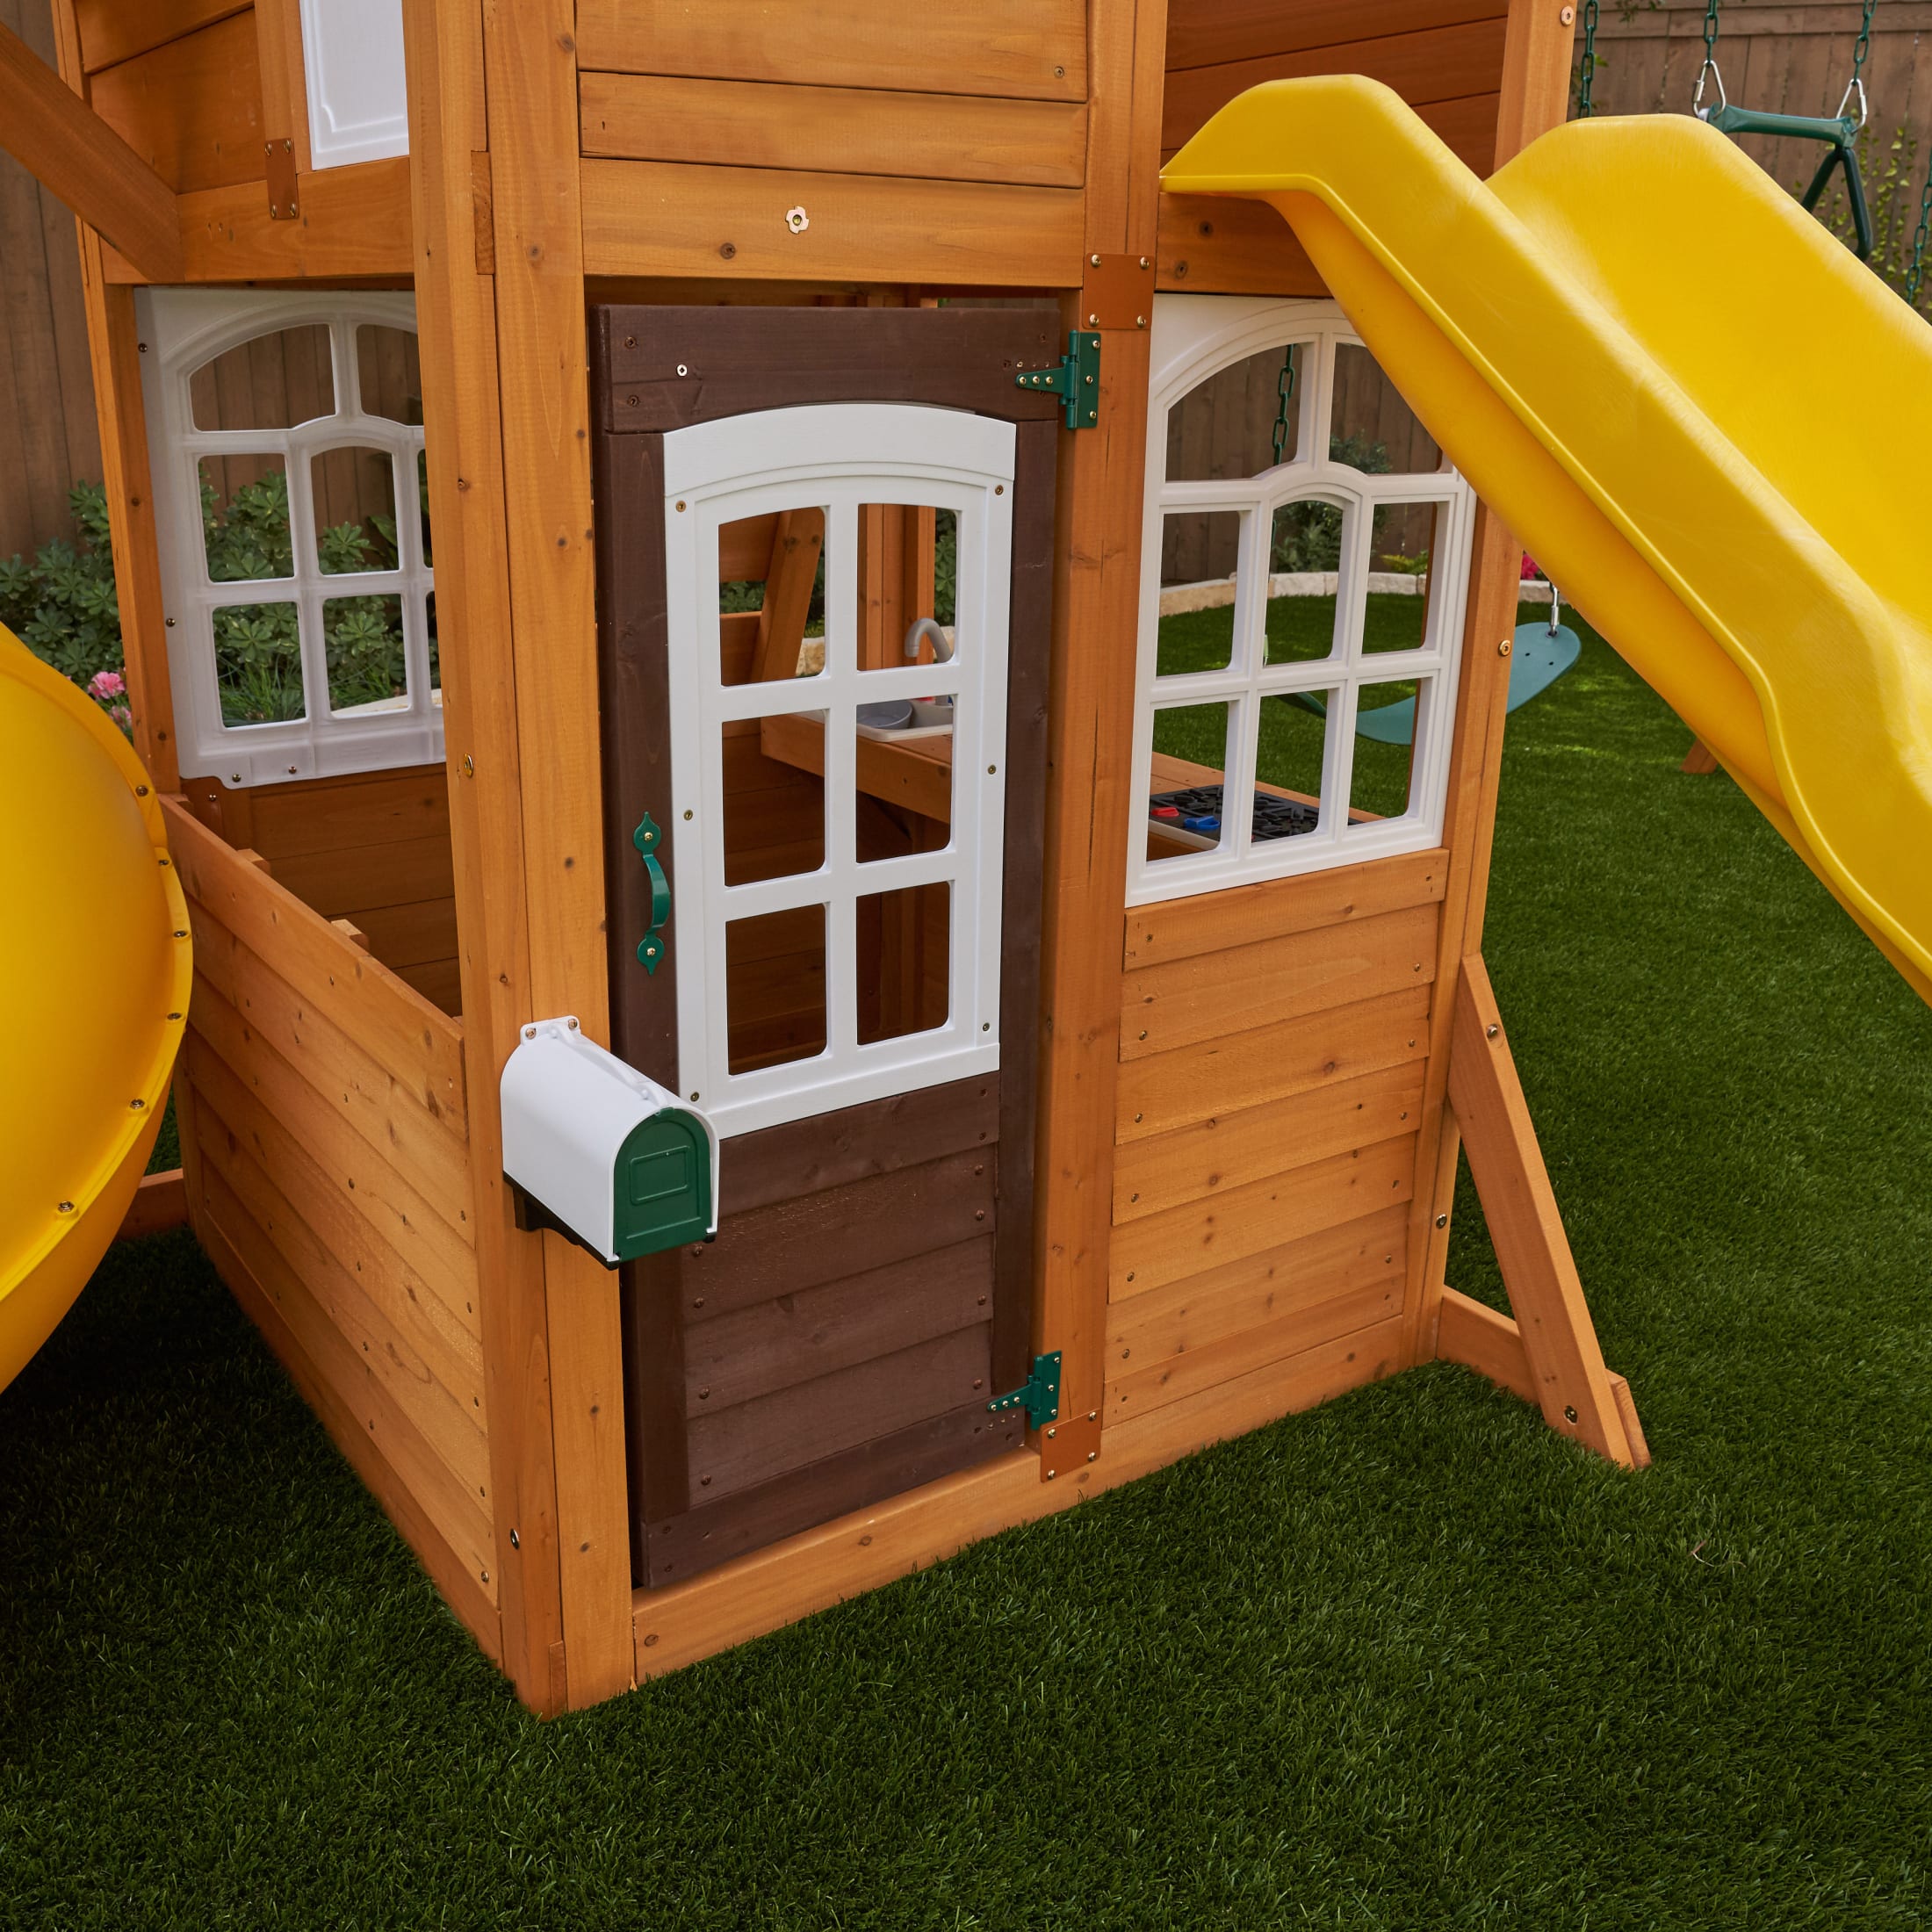 KidKraft Castlewood Wooden Swing Set / Playset with Clubhouse, Mailbox, Slide and Play Kitchen - image 3 of 10